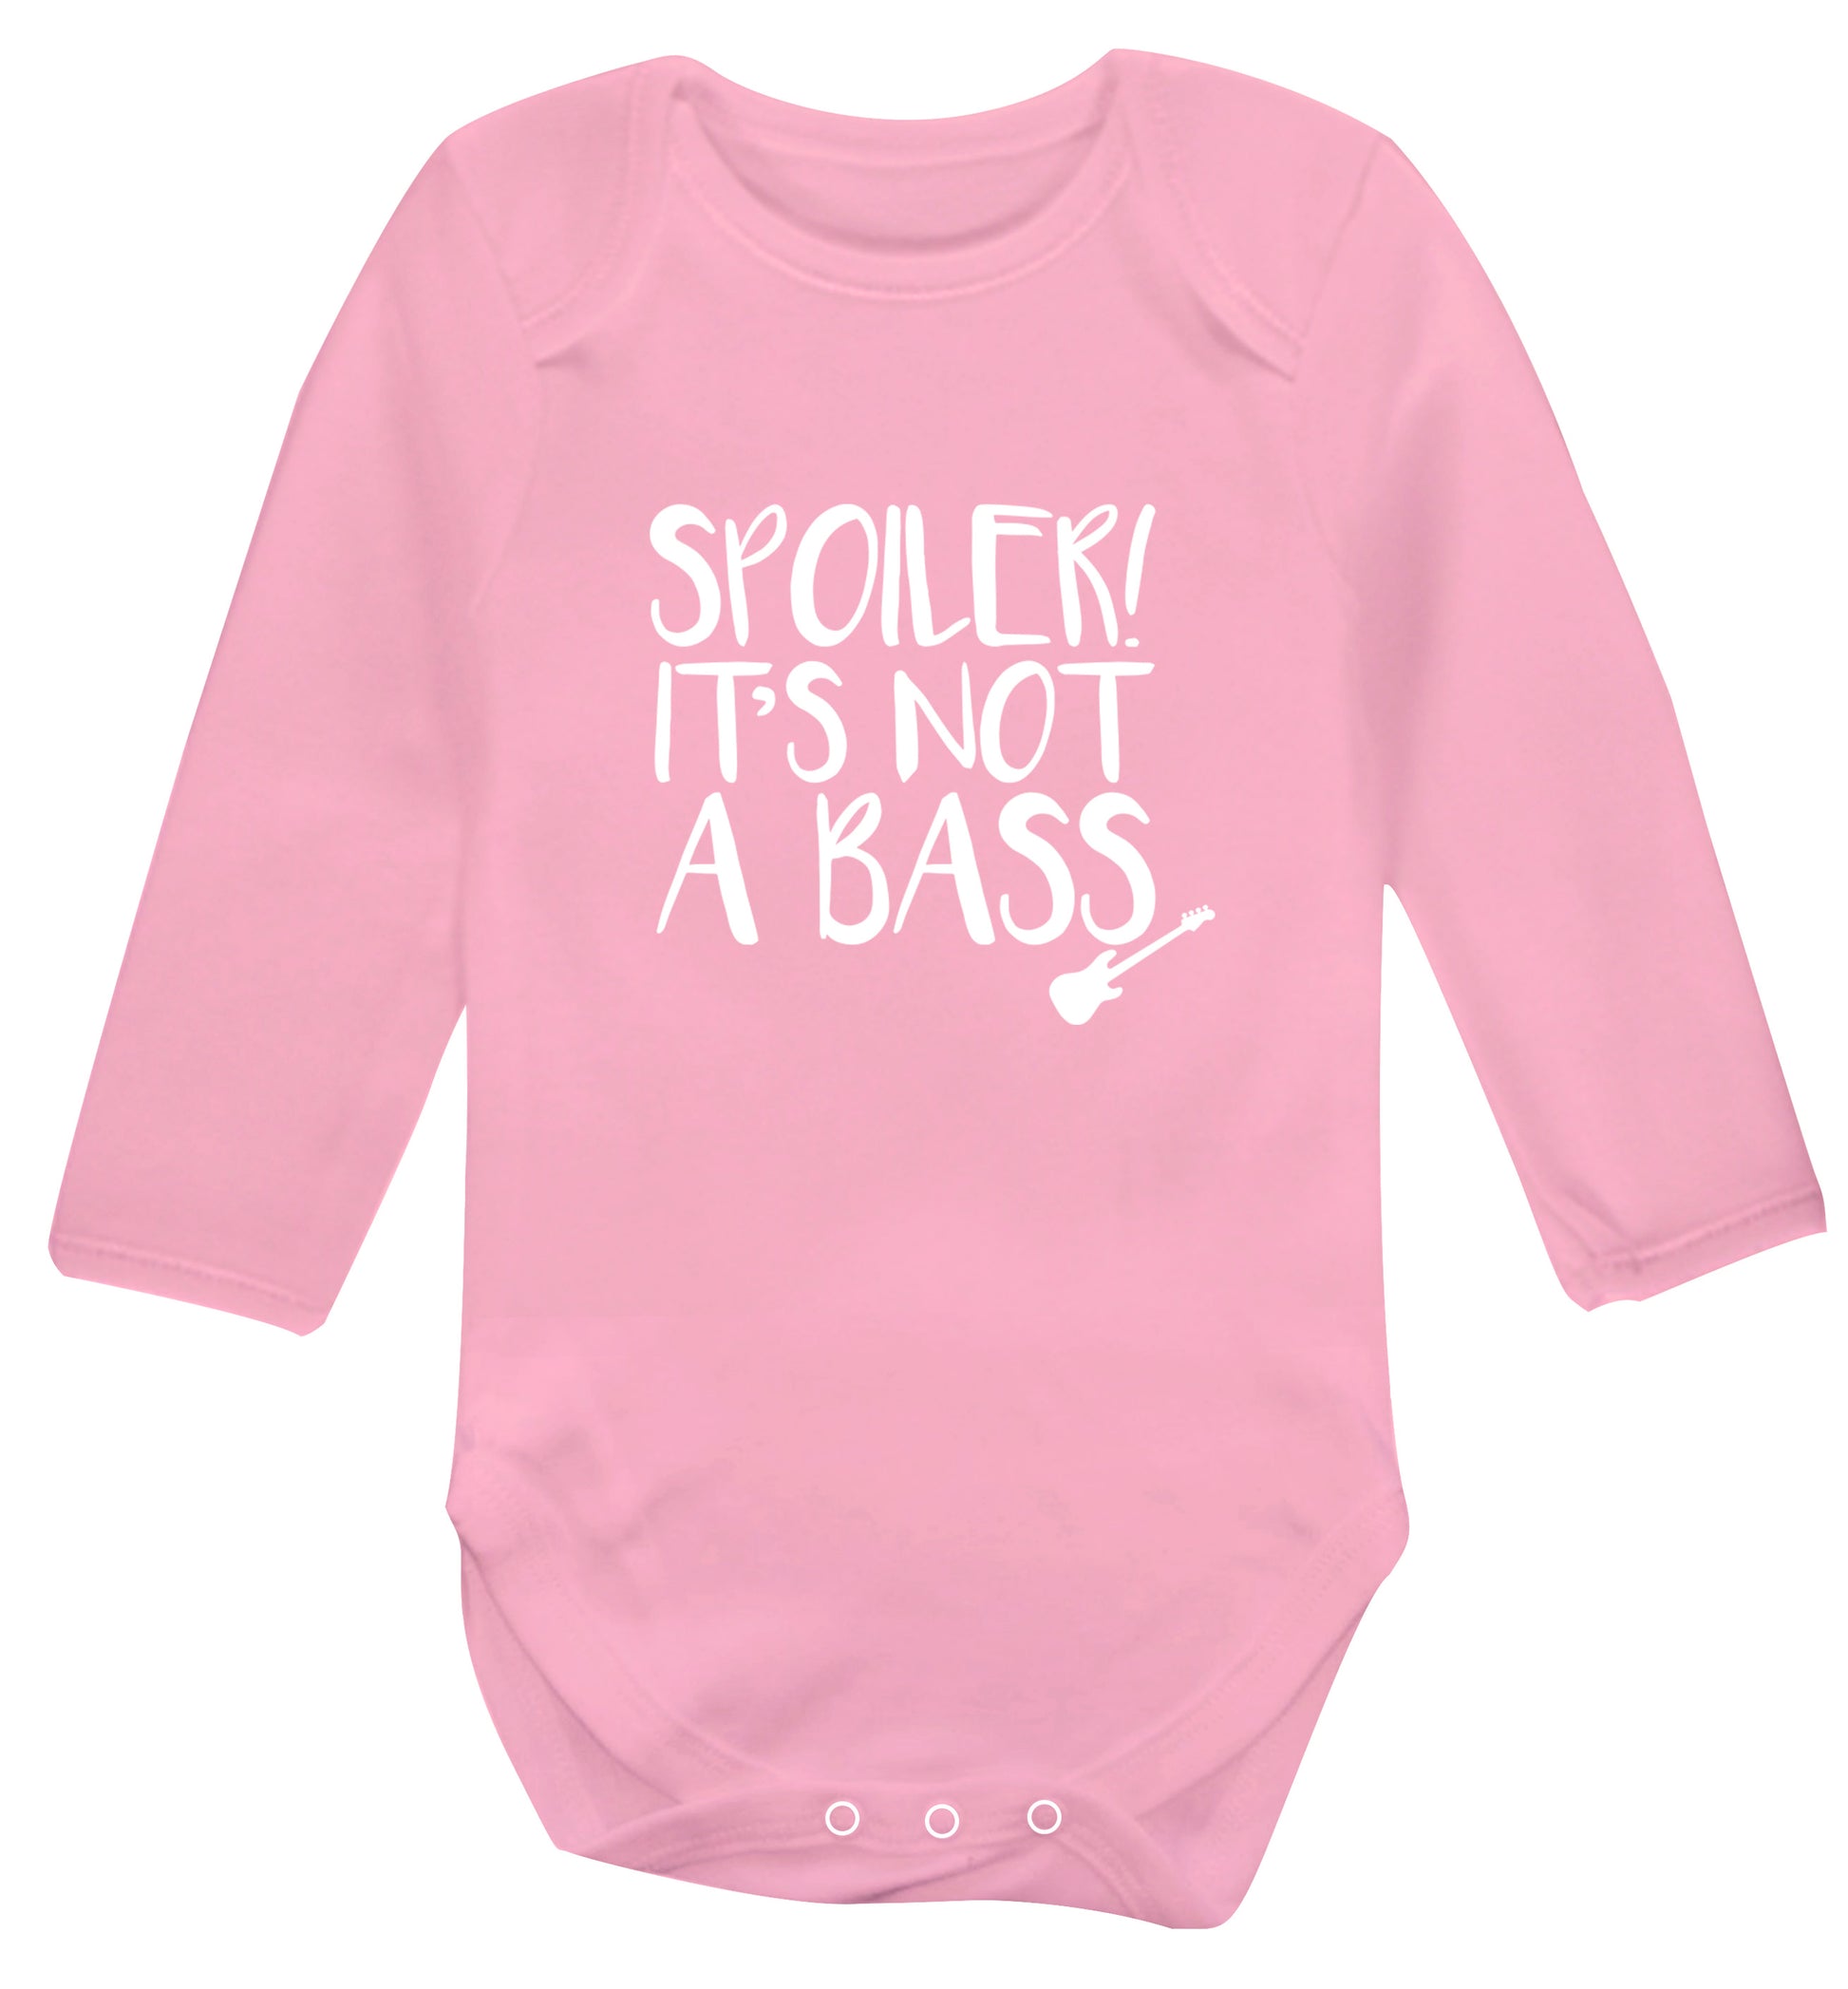 Spoiler it's not a bass Baby Vest long sleeved pale pink 6-12 months